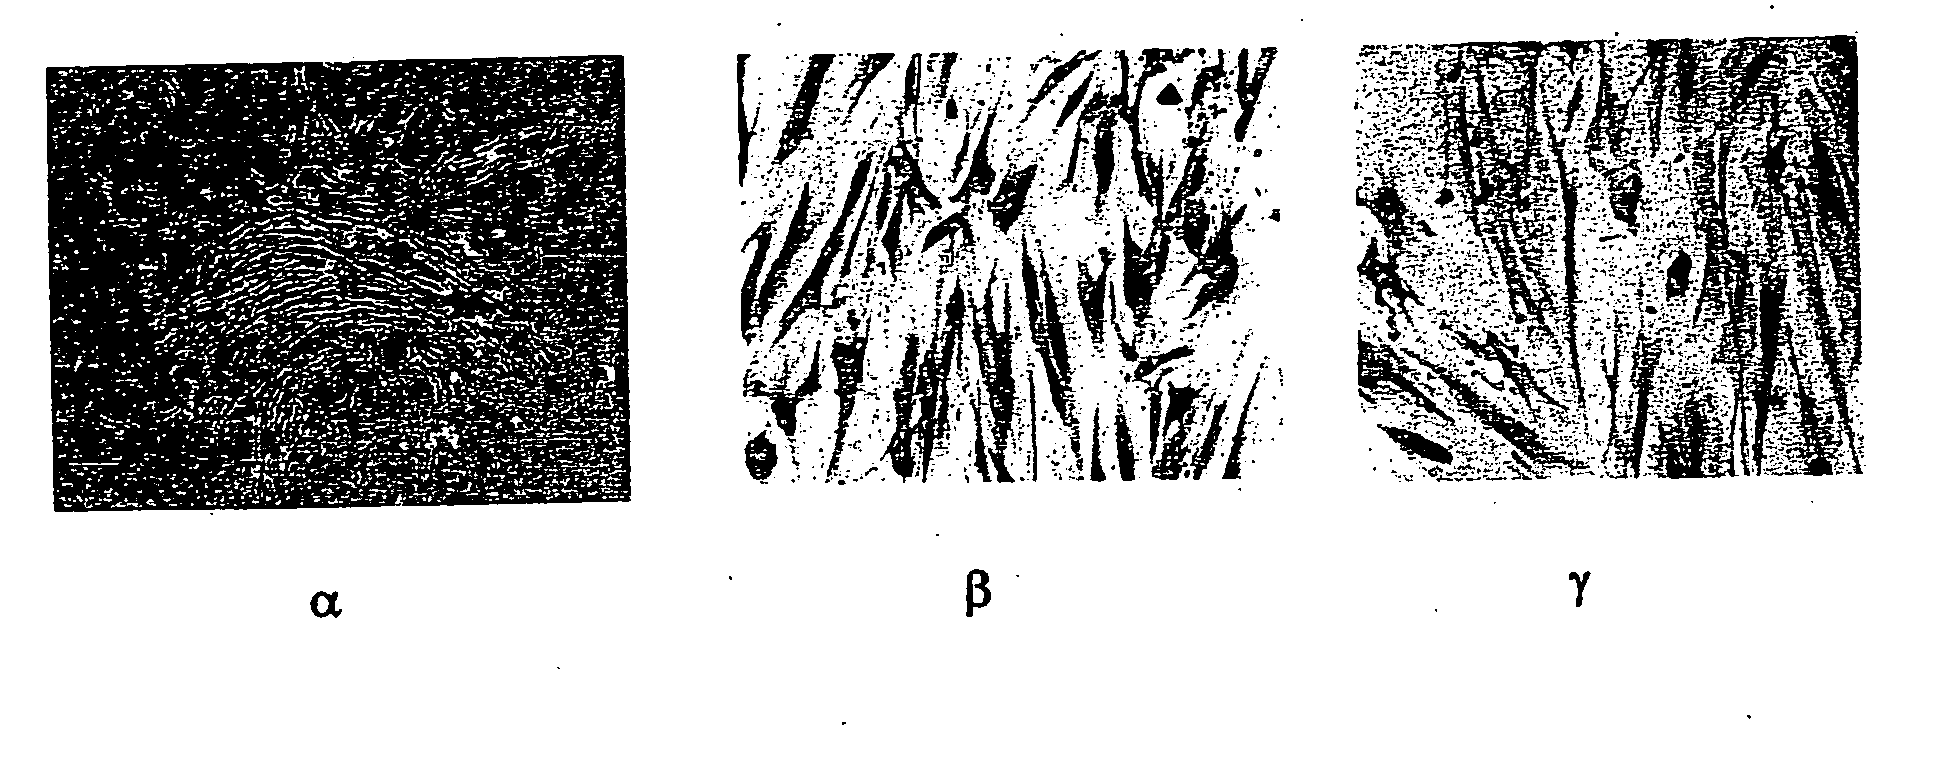 Pluripotent embryonic-like stem cells derived from teeth and uses thereof